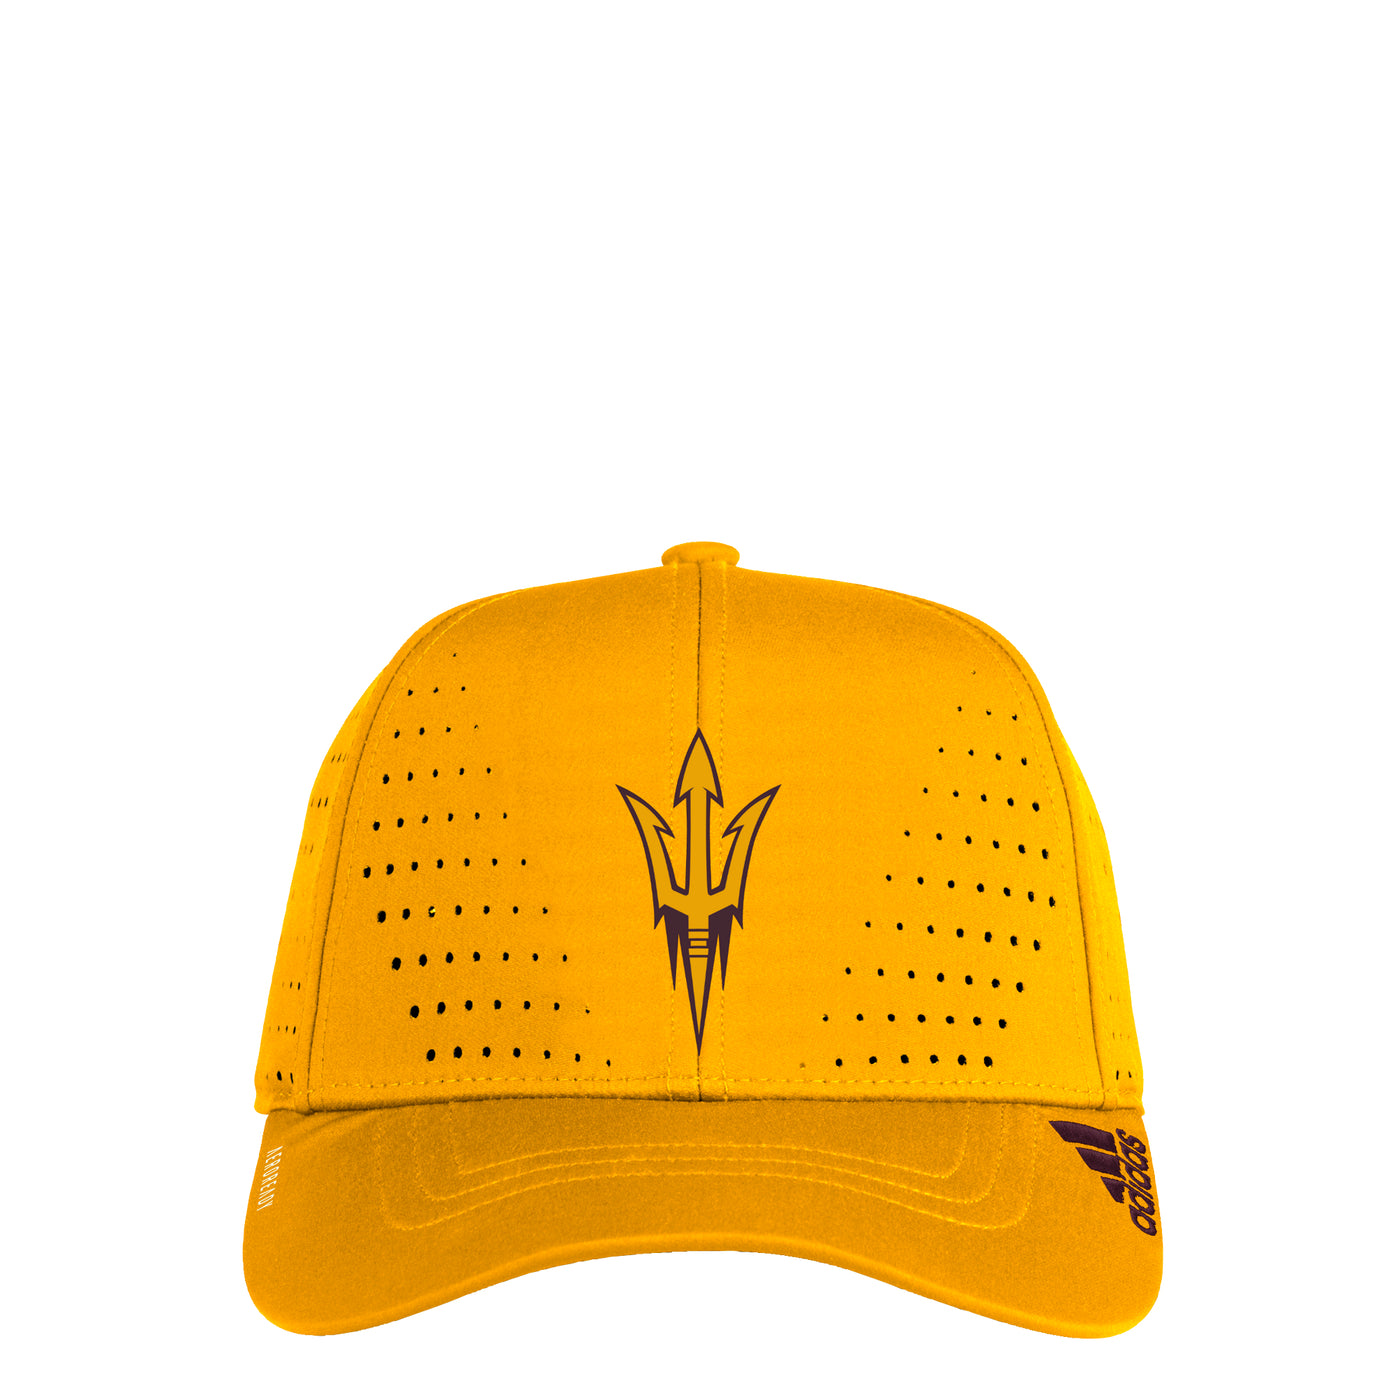 ASU gld Adidas hat with pitchfork on the front and breathable holes in fabric